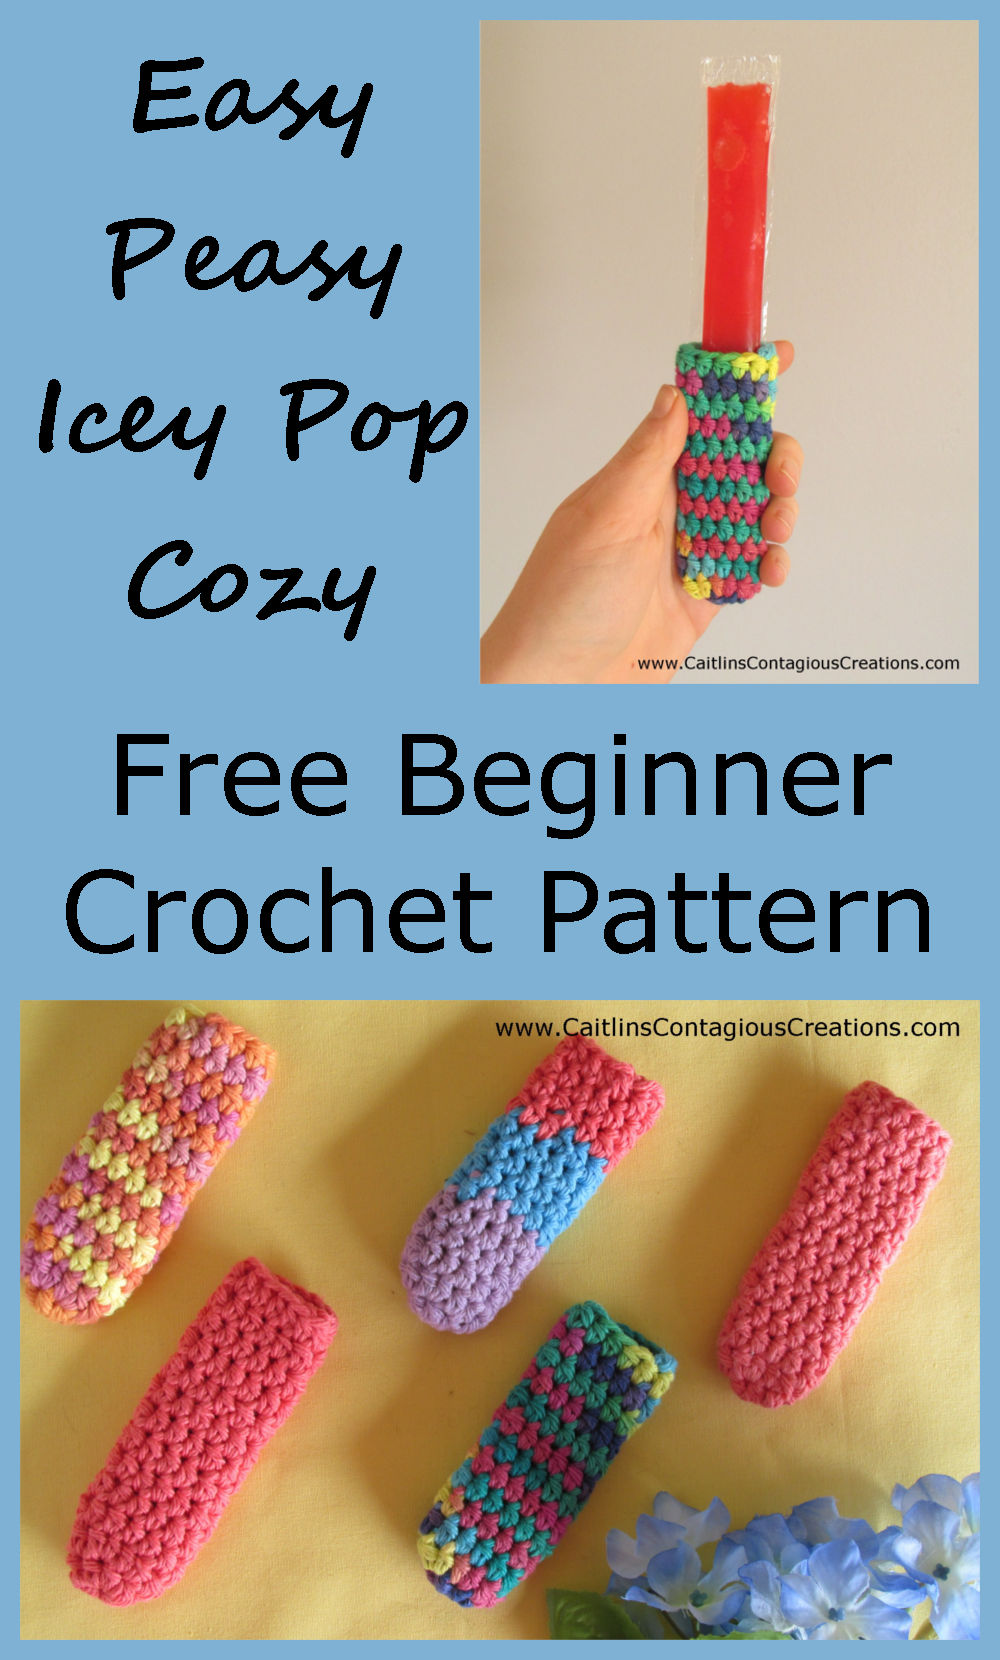 Free Ice Pop Cozy Crochet Pattern from Caitlin's Contagious Creations. Beginner friendly freezer popsicle holder crochet design includes written directions and step by step photos. Make it with machine washable cotton yarn and never have hold or sticky hands again! Make yours now!